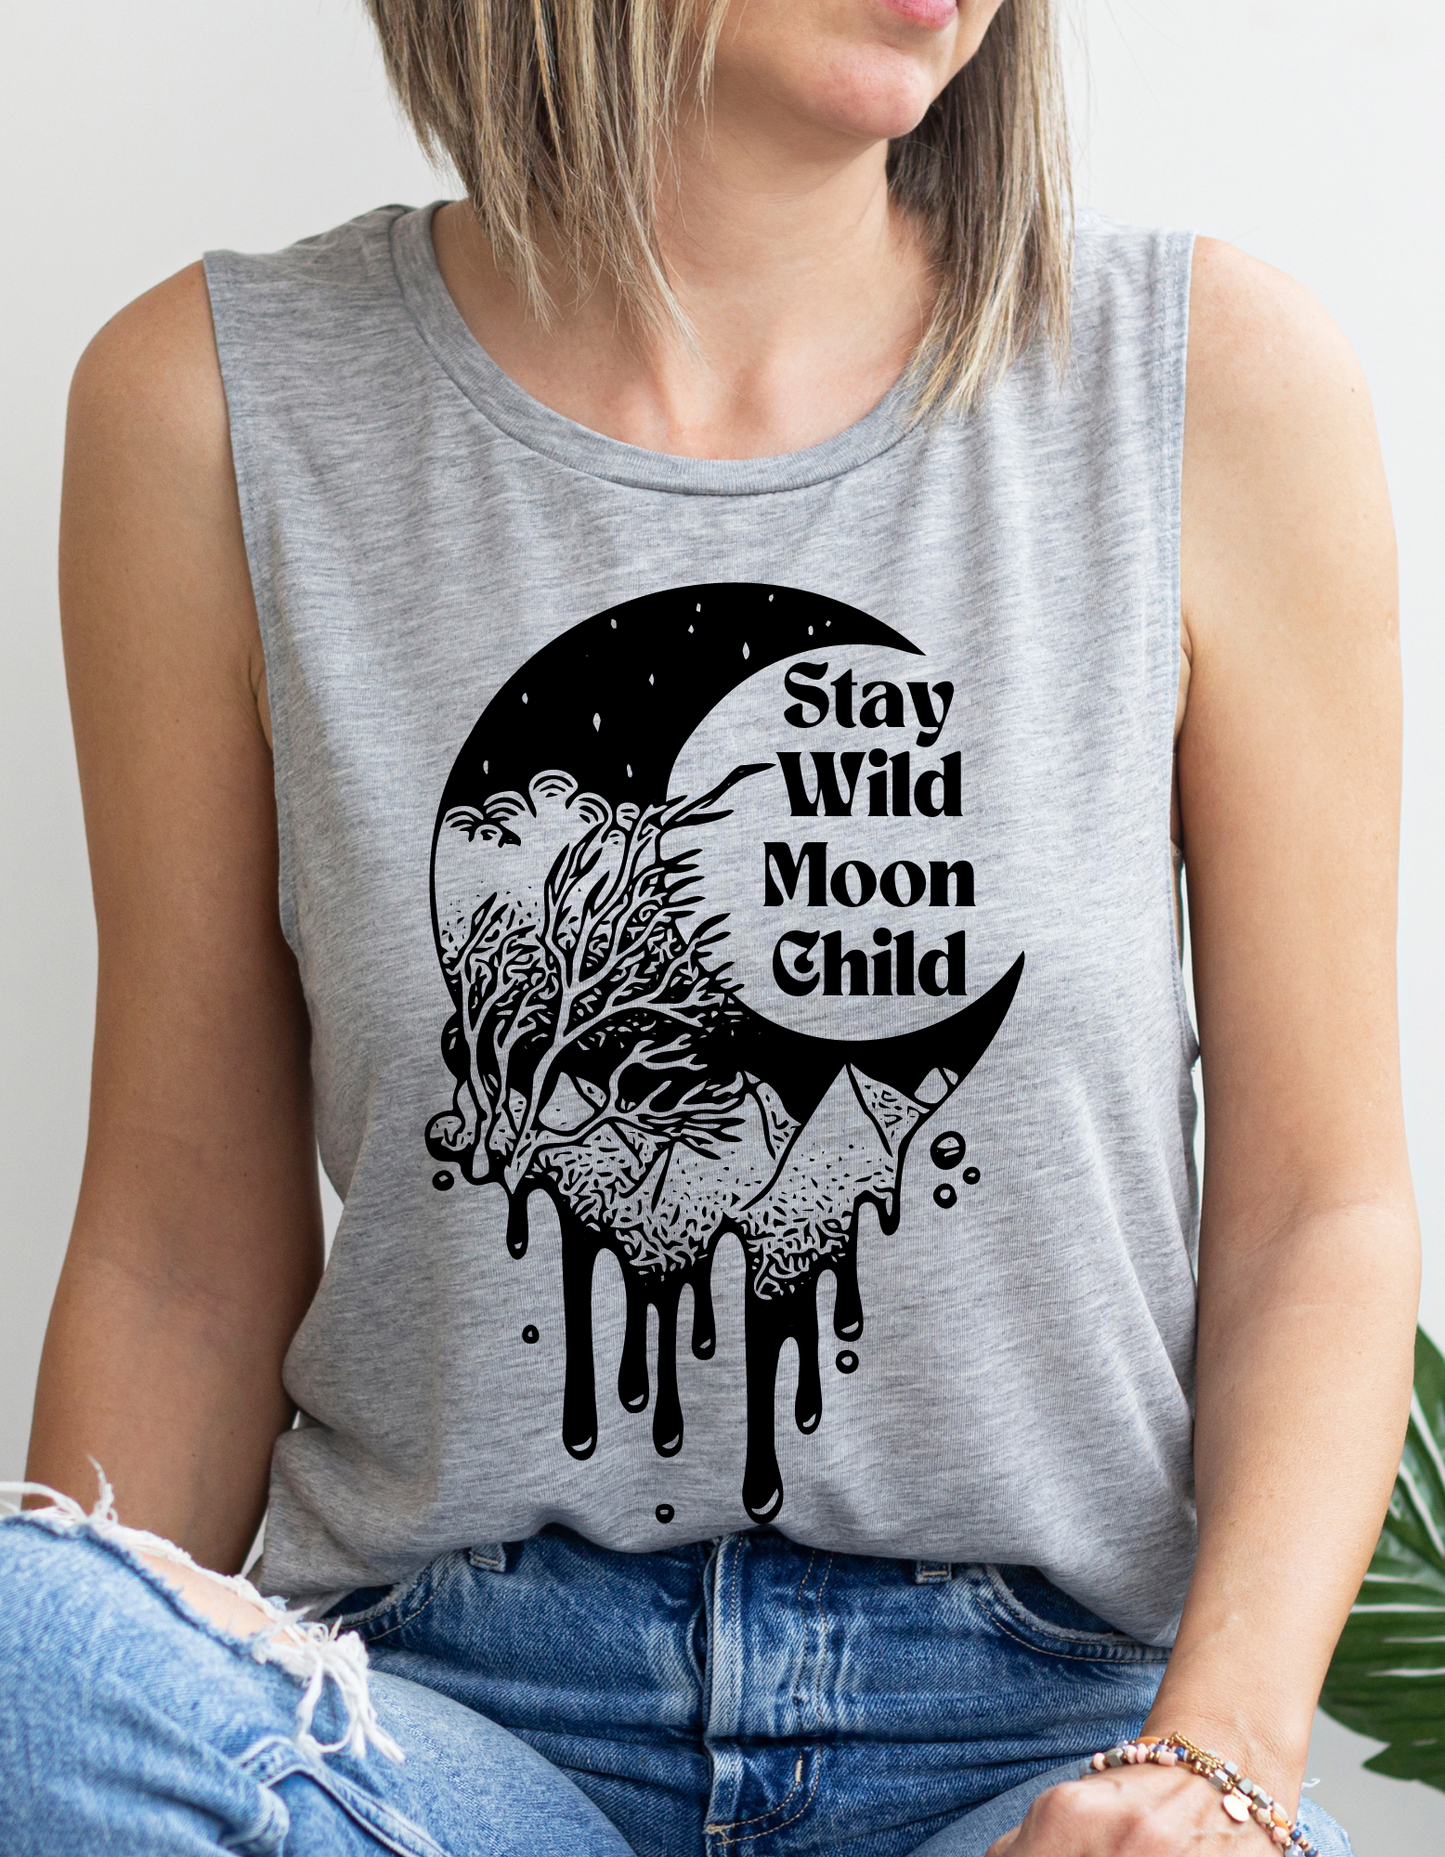 Black crescent moon with trees and mountains dripping. In the middle of the crescent are the words "stay wild moon child". All black graphic on a grey tank top.